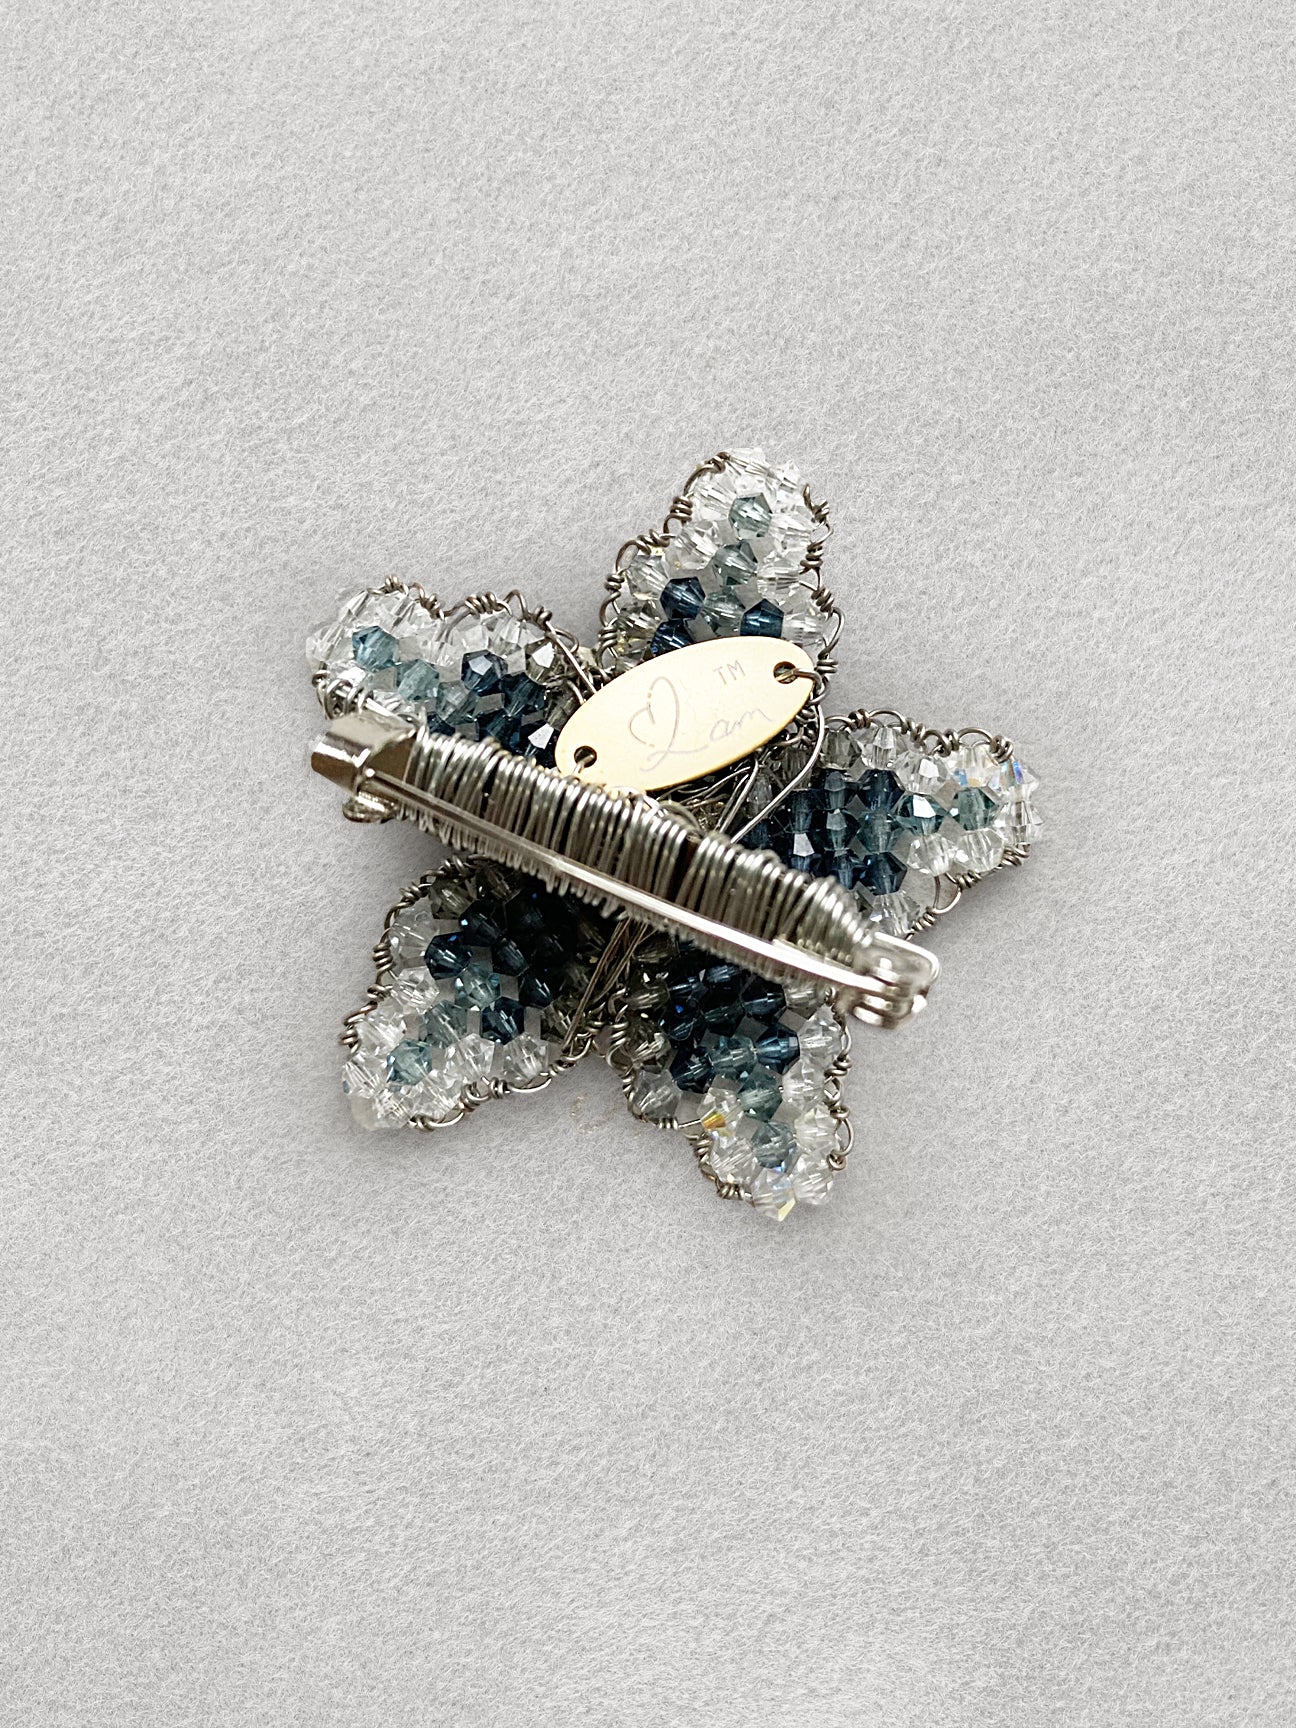 Taubman Museum -  Denim/Crystal "Star City of the South" Lapel Pin